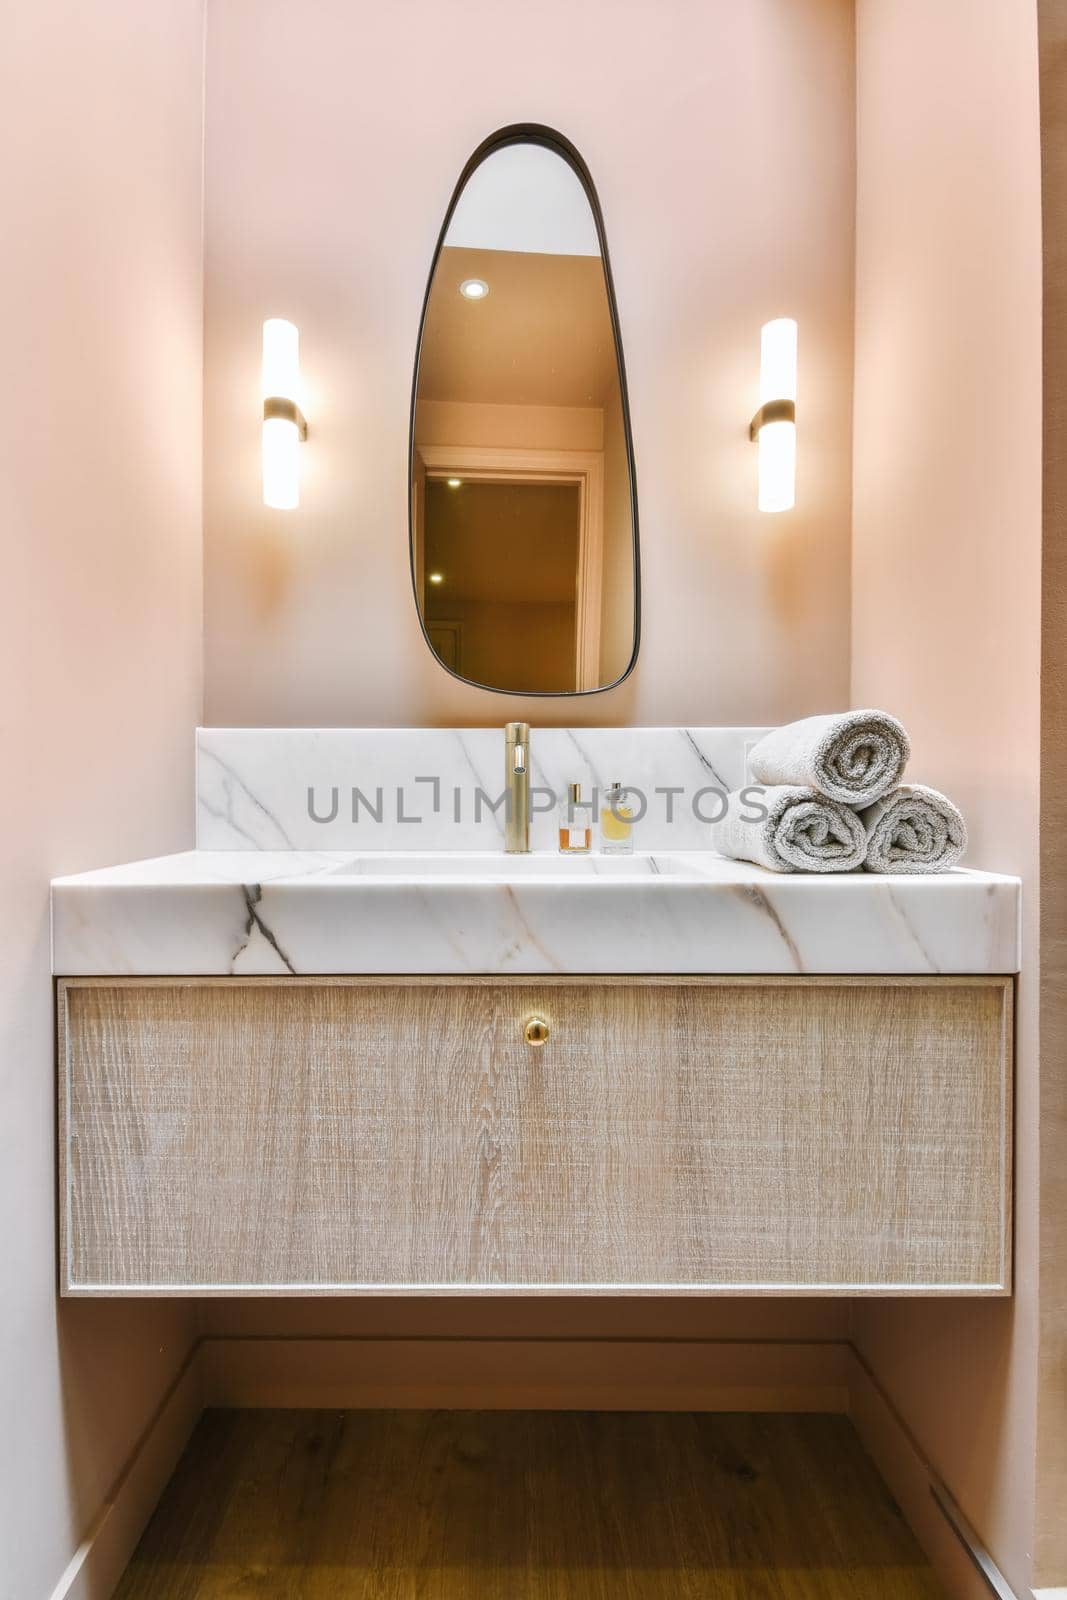 Luxurious washroom with peach walls and marble top and sink